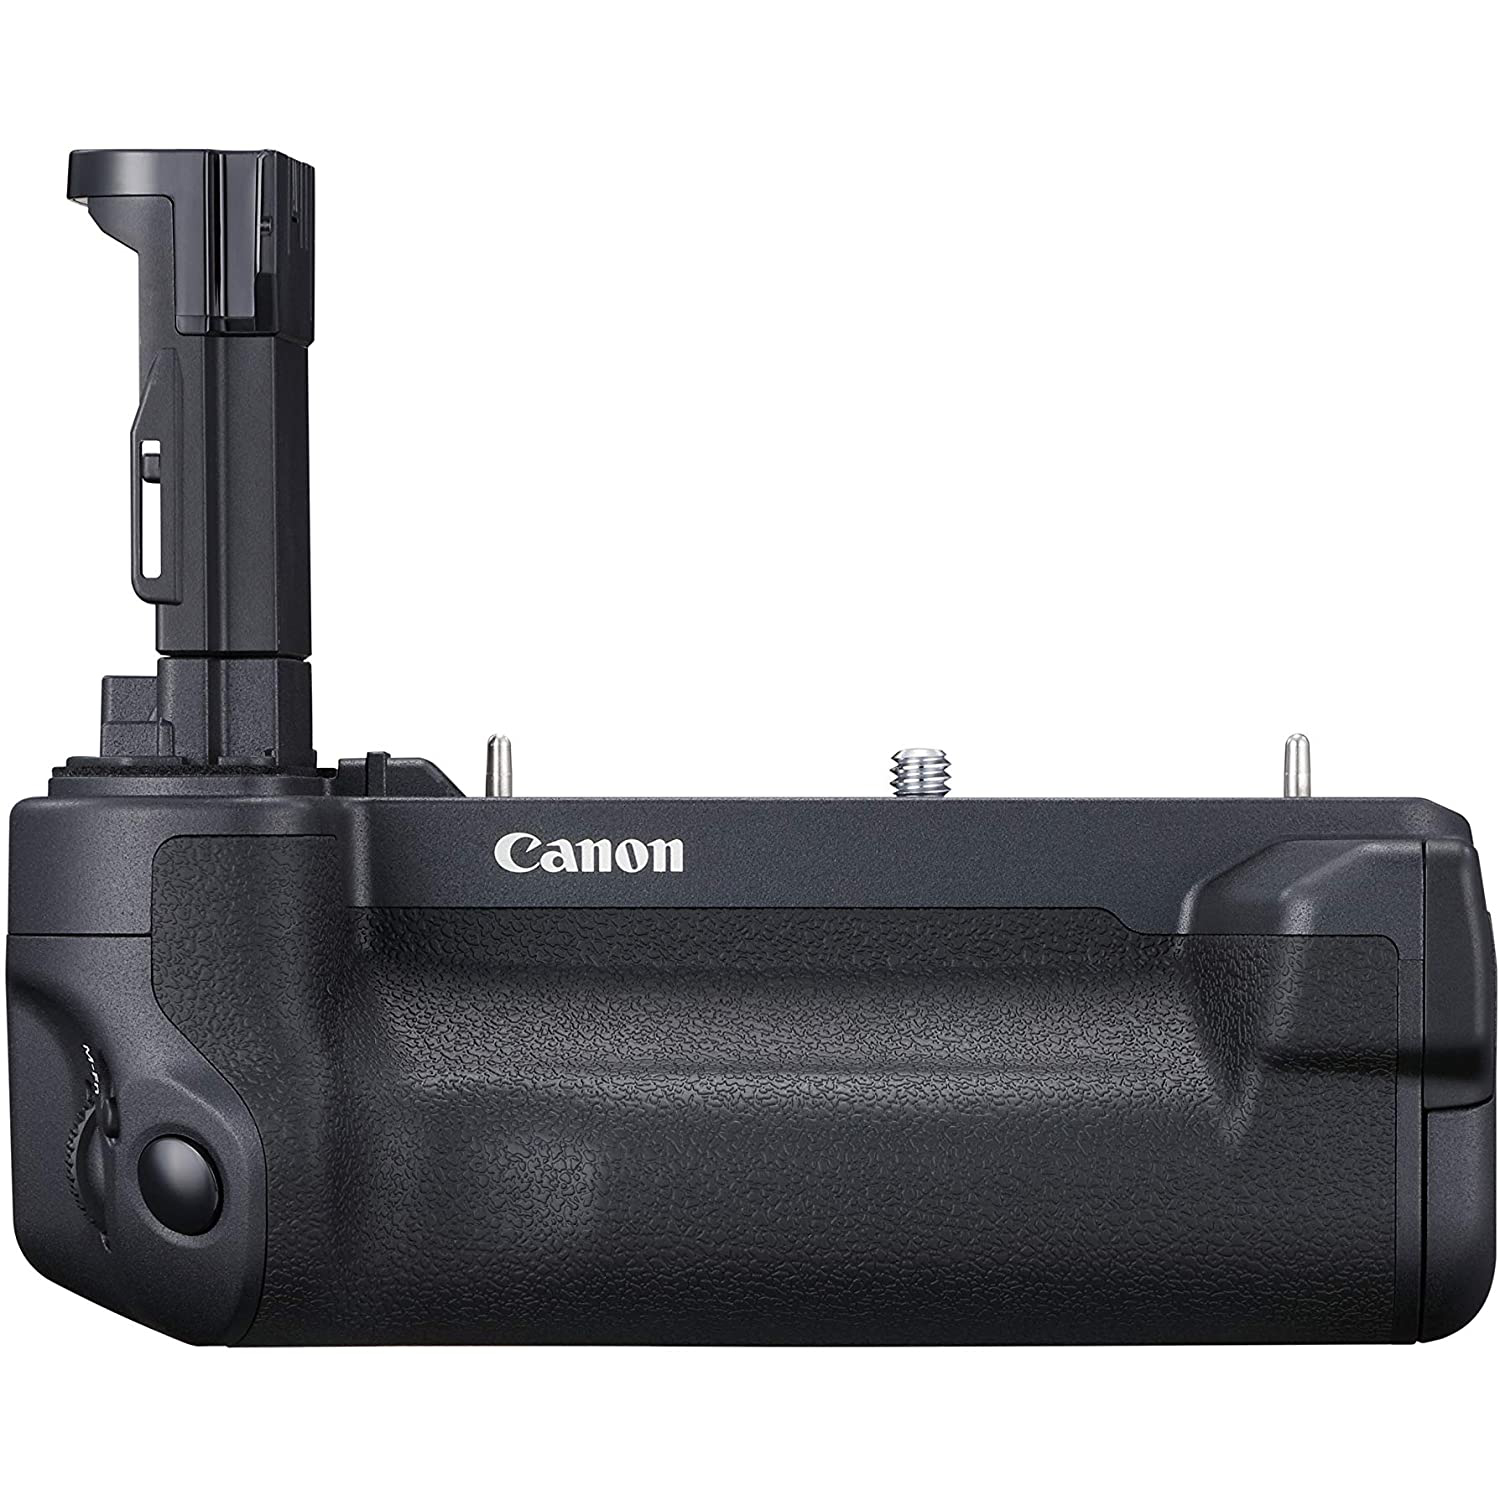 Canon WFT-R10A Wireless File Transmitter for EOS R5 with Integrated Battery Grip